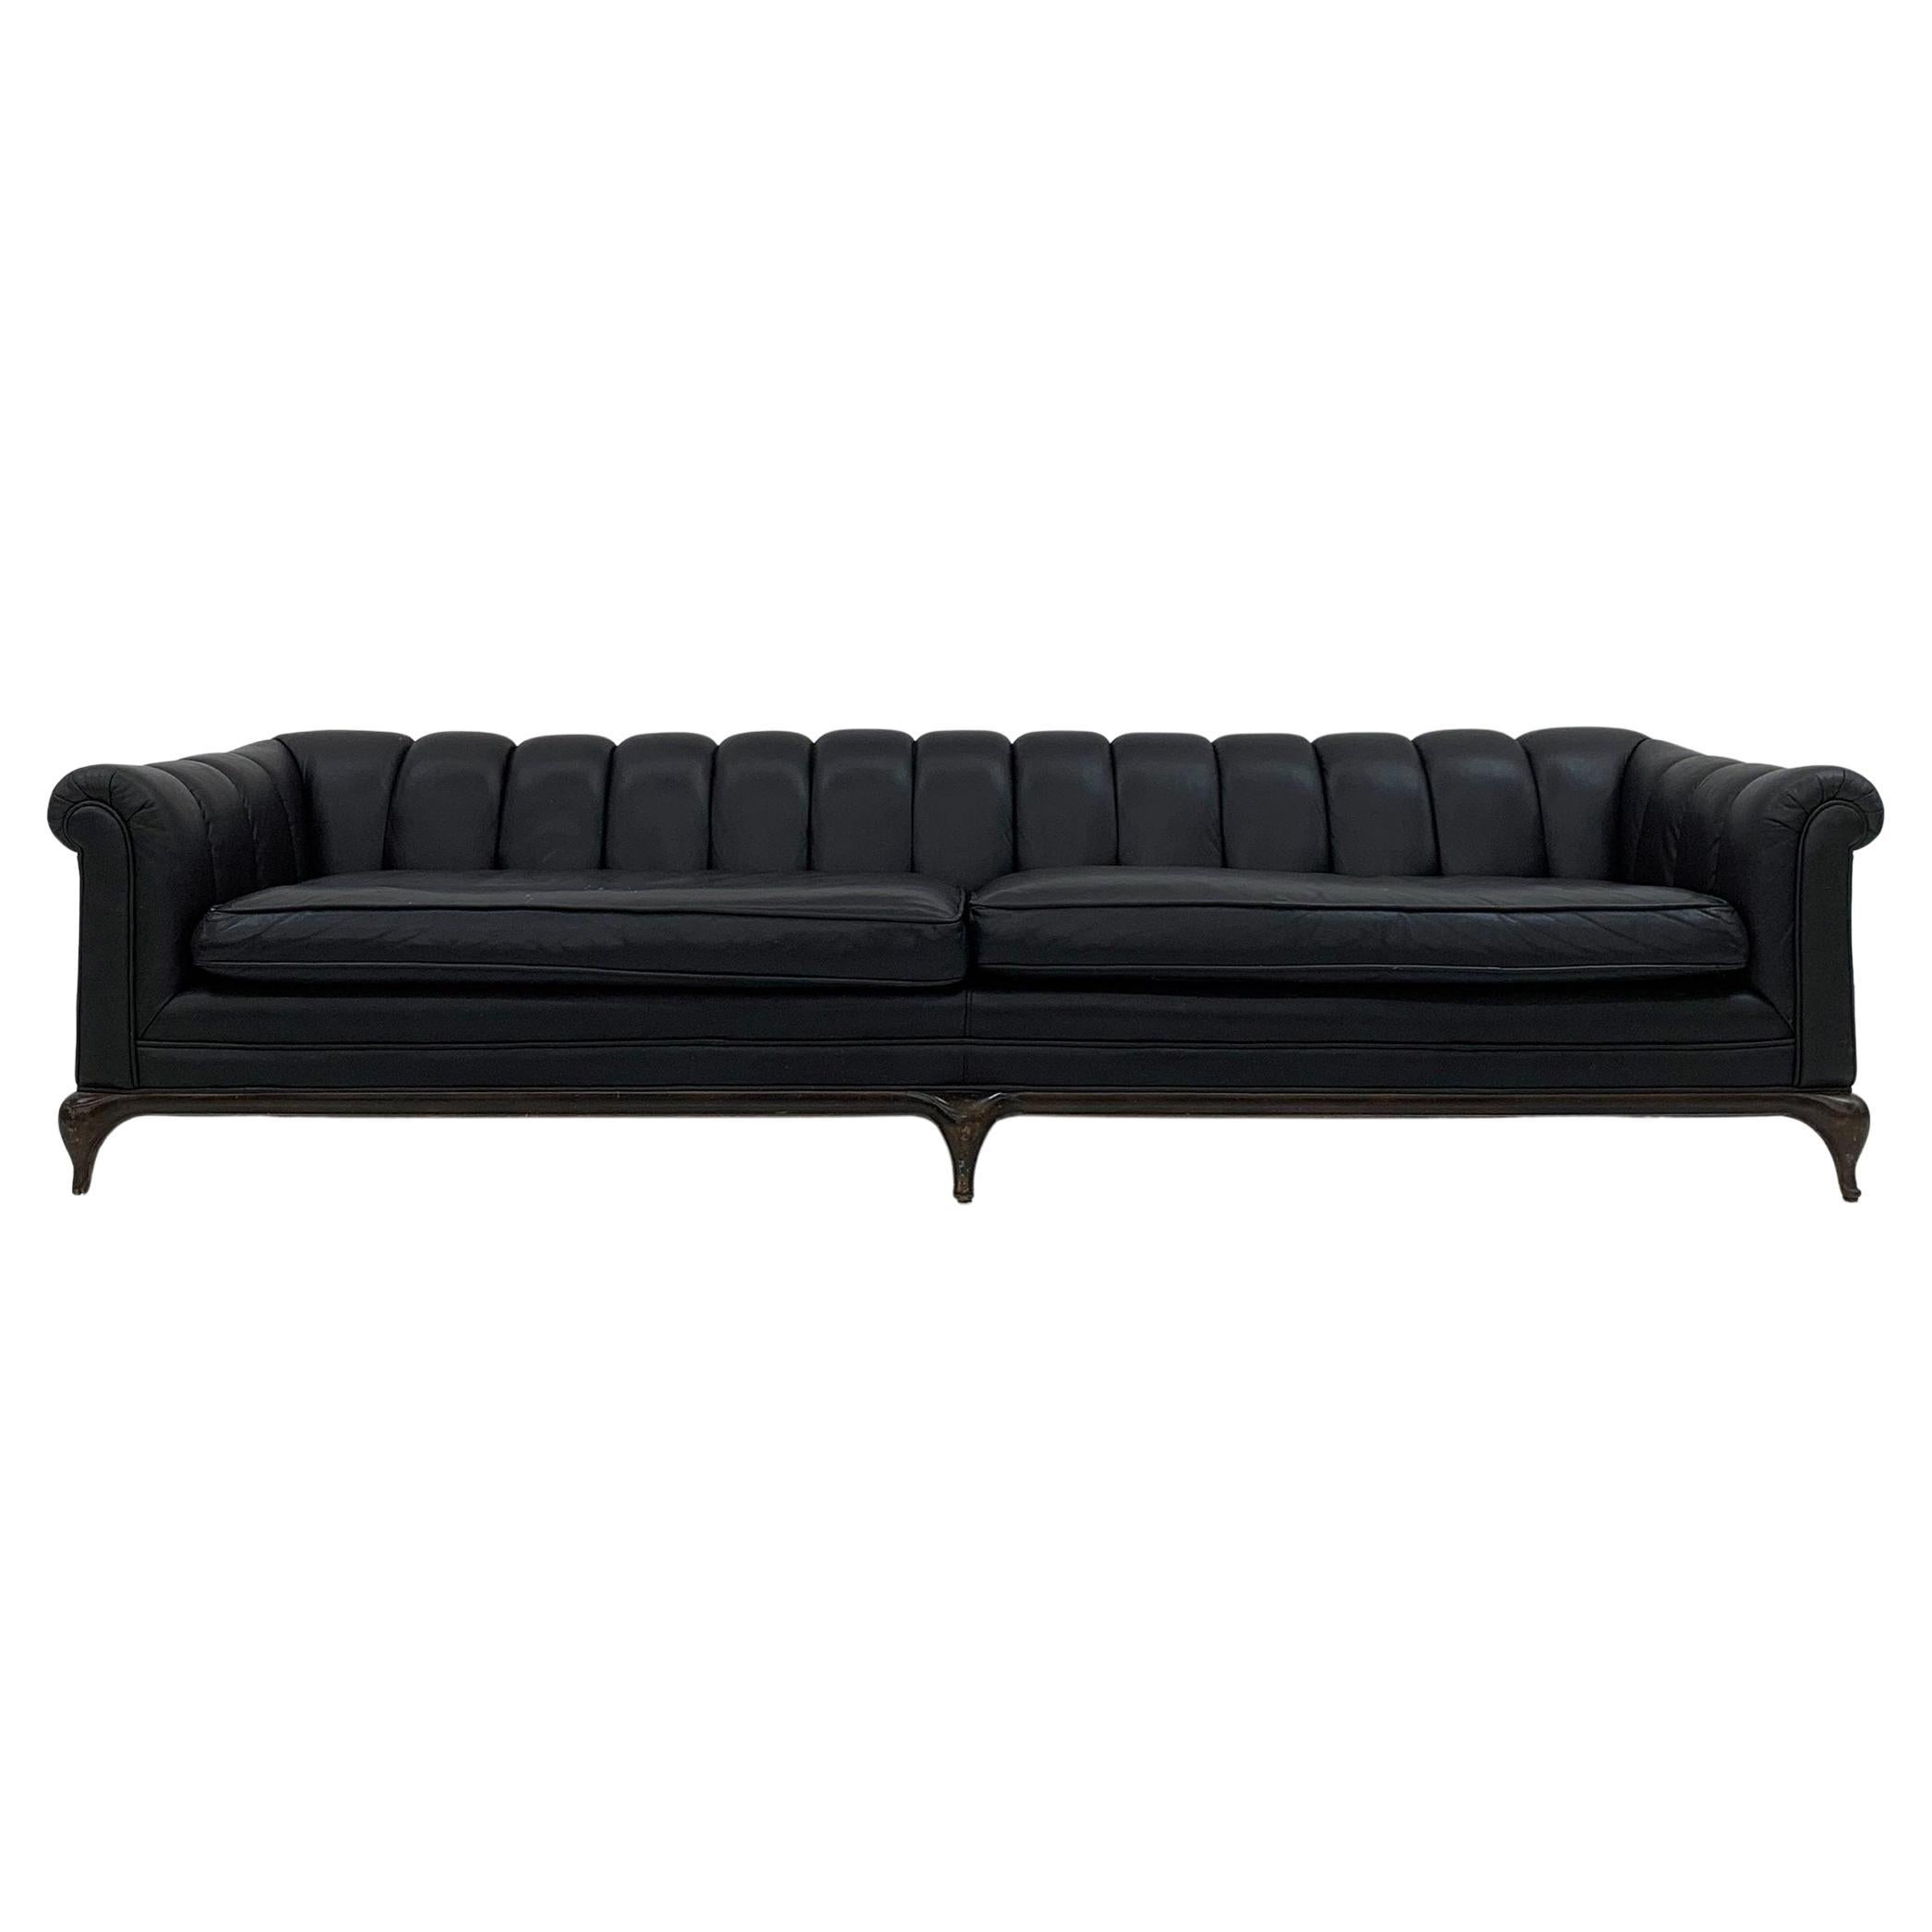 Maurice Bailey for Monteverdi Young Black Leather Channel Back Sofa